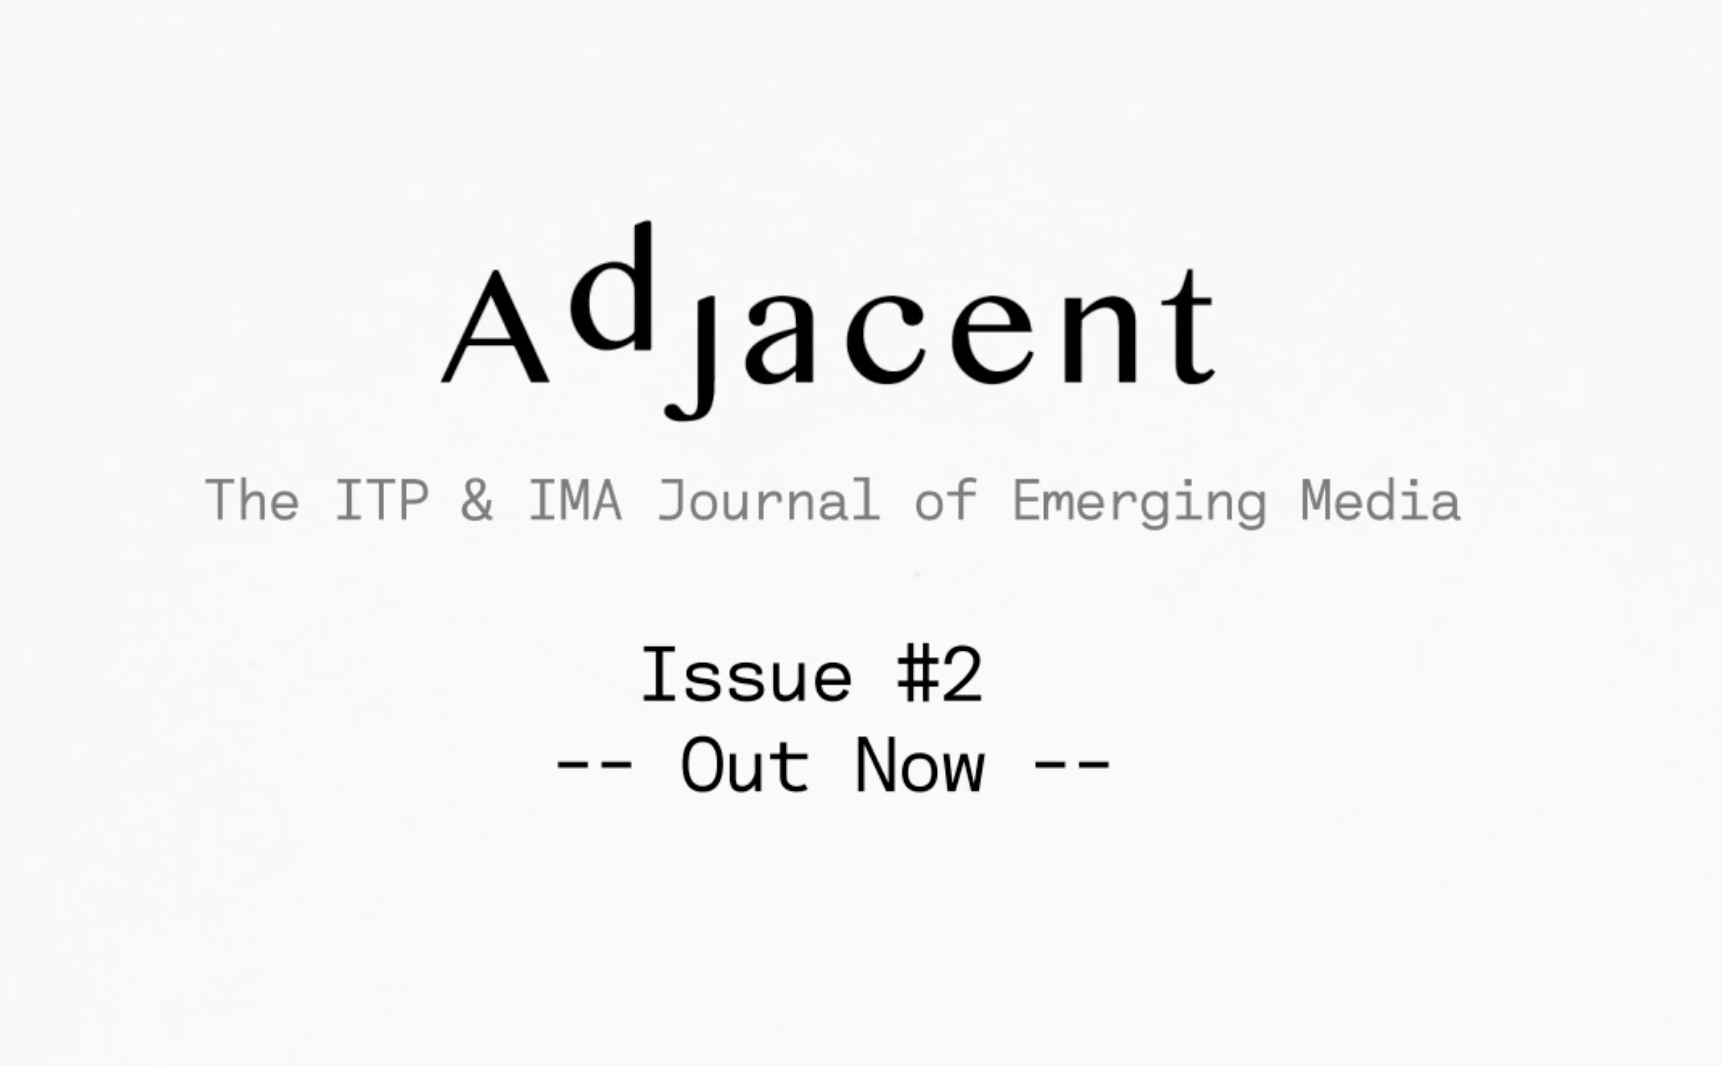 Adjacent, the ITP and IMA Journal of Emerging Media